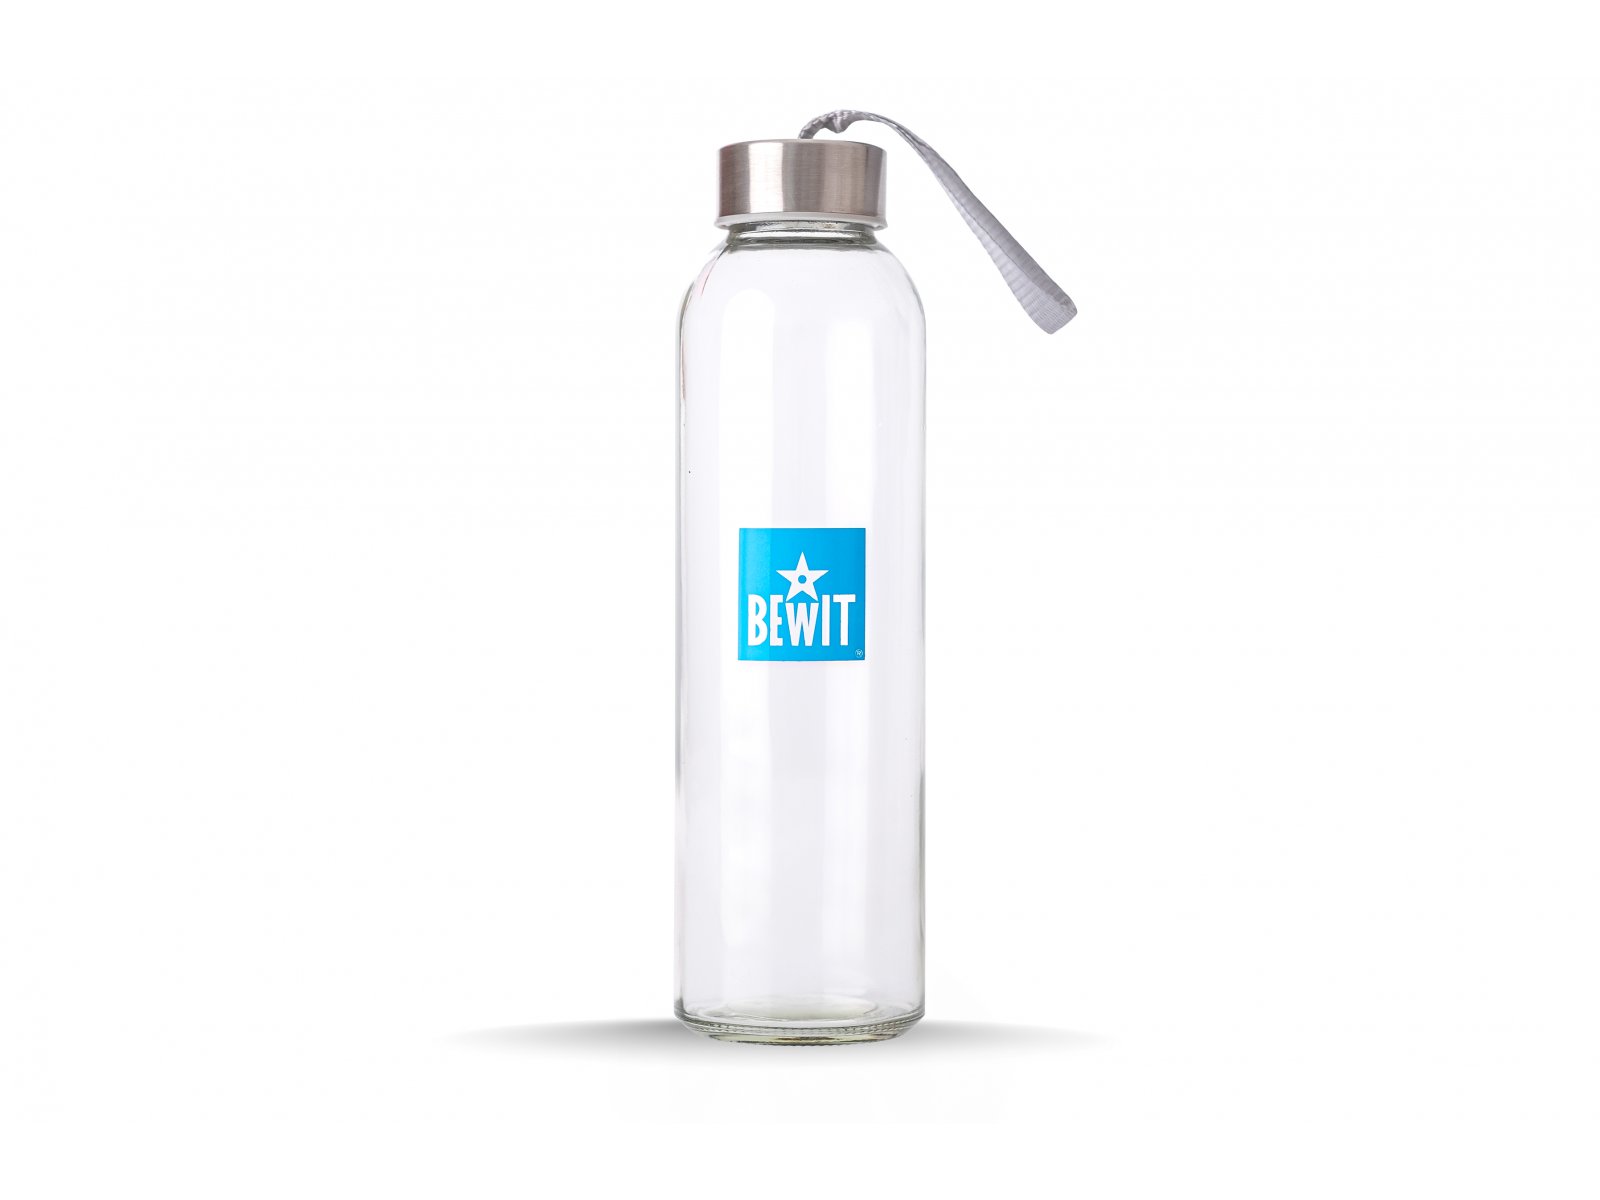 BEWIT Glass bottle 0,5 l with LOGO - glass bottle - 1